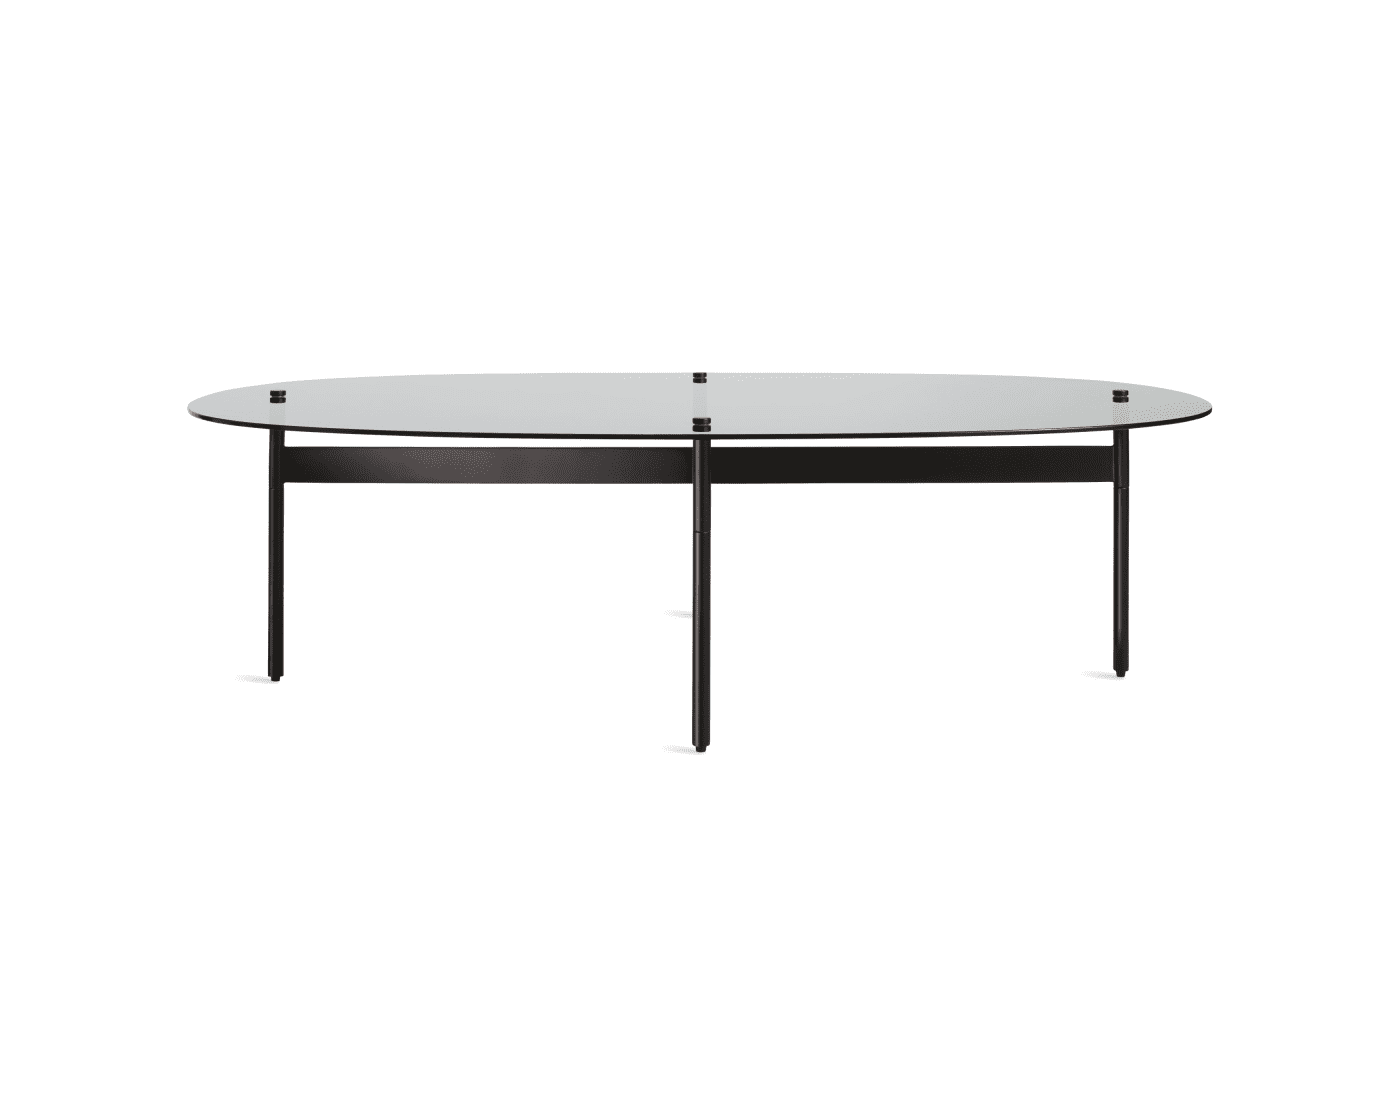 Flume Swoval Coffee Table